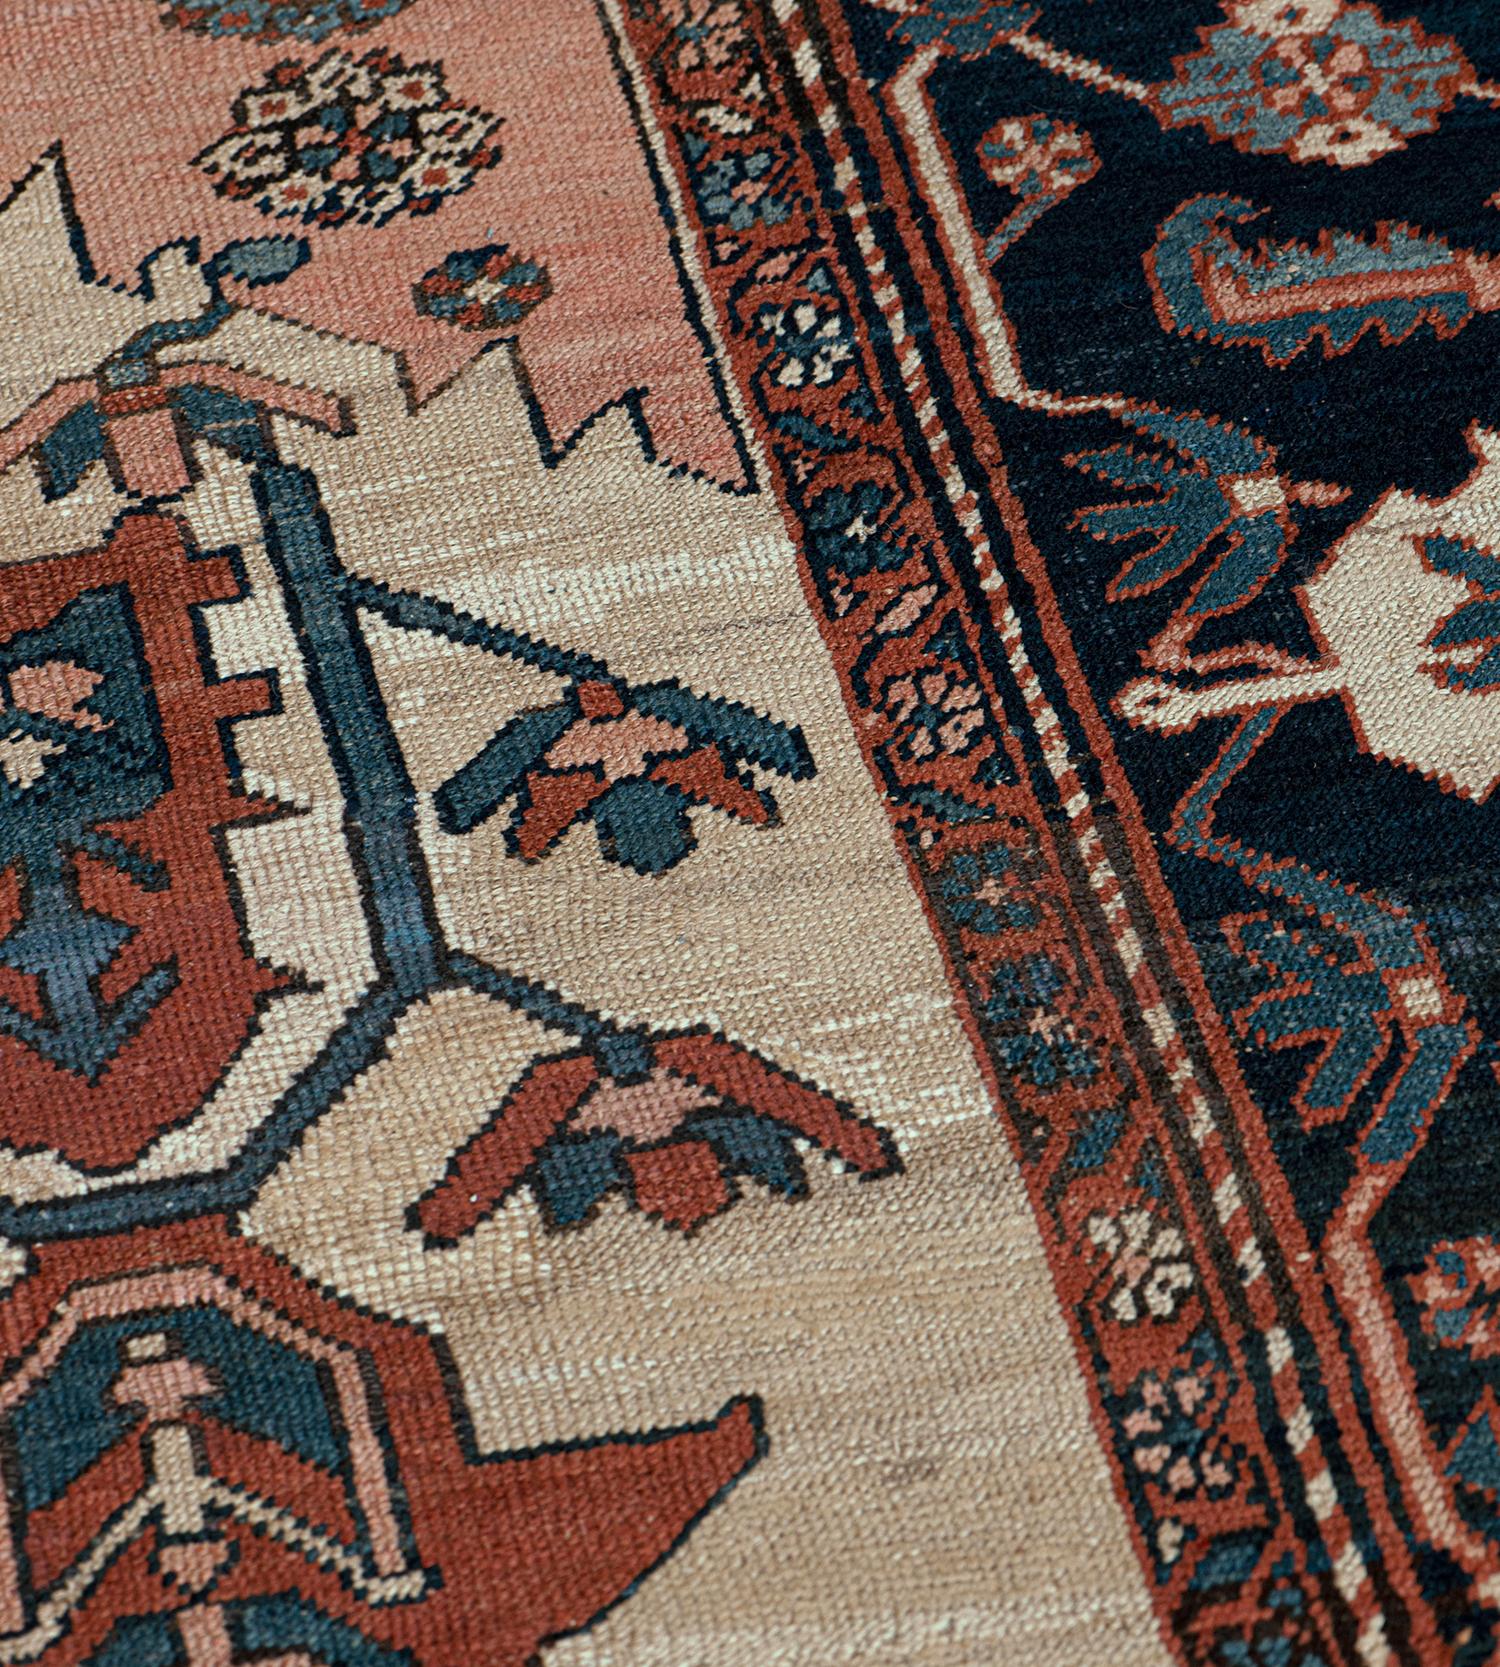 This traditional handwoven Persian Serapi rug has an ivory field with an overall design of brick-red, indigo and coral bold palmette and floral vines, in a deep indigo angular palmette vine border.